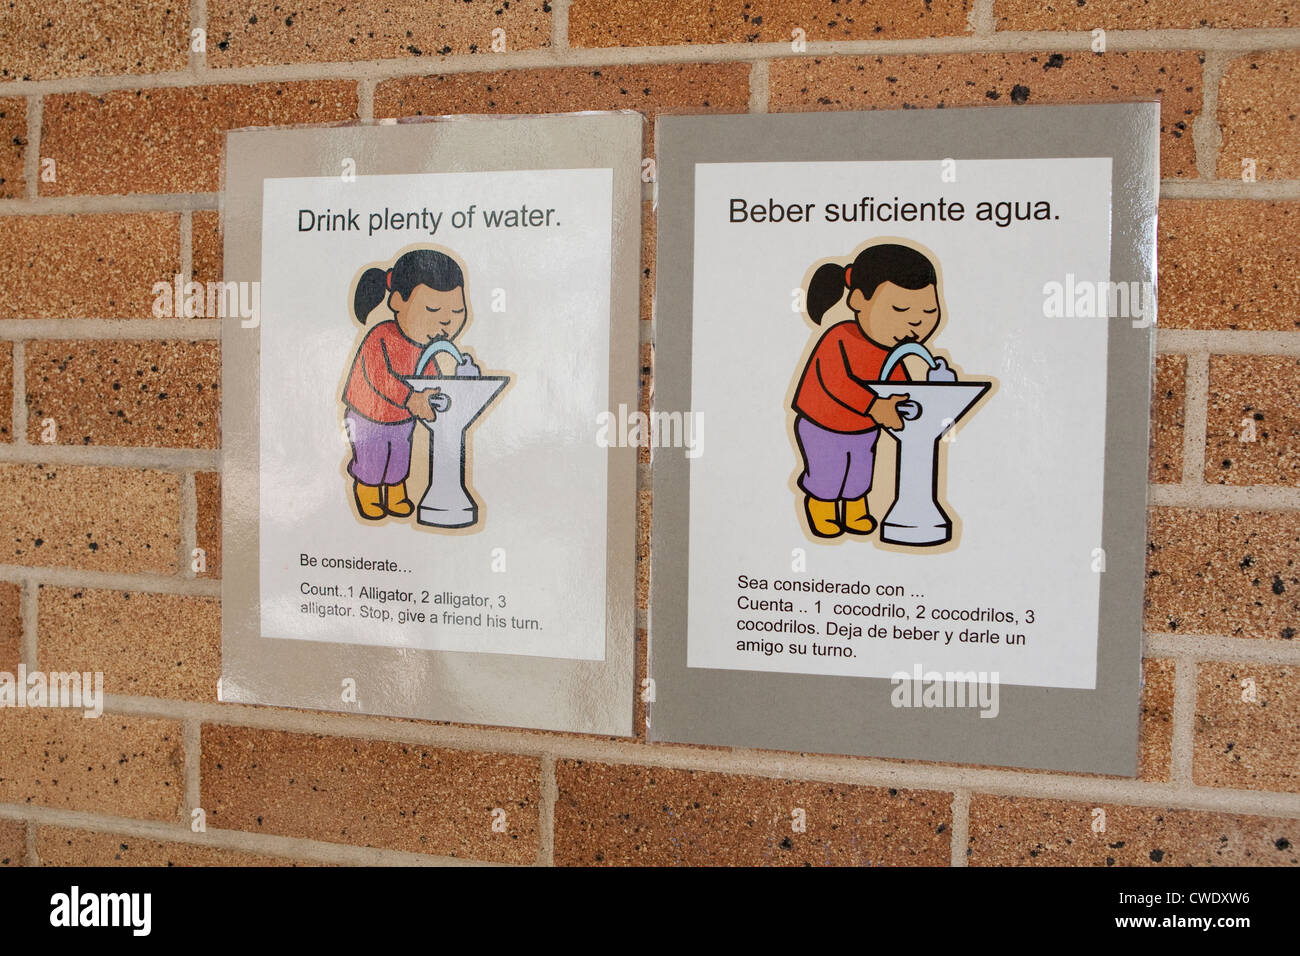 Bilingual sign in English and Spanish on wall of Elementary School in Austin, Texas instructs students to drink plenty of water Stock Photo